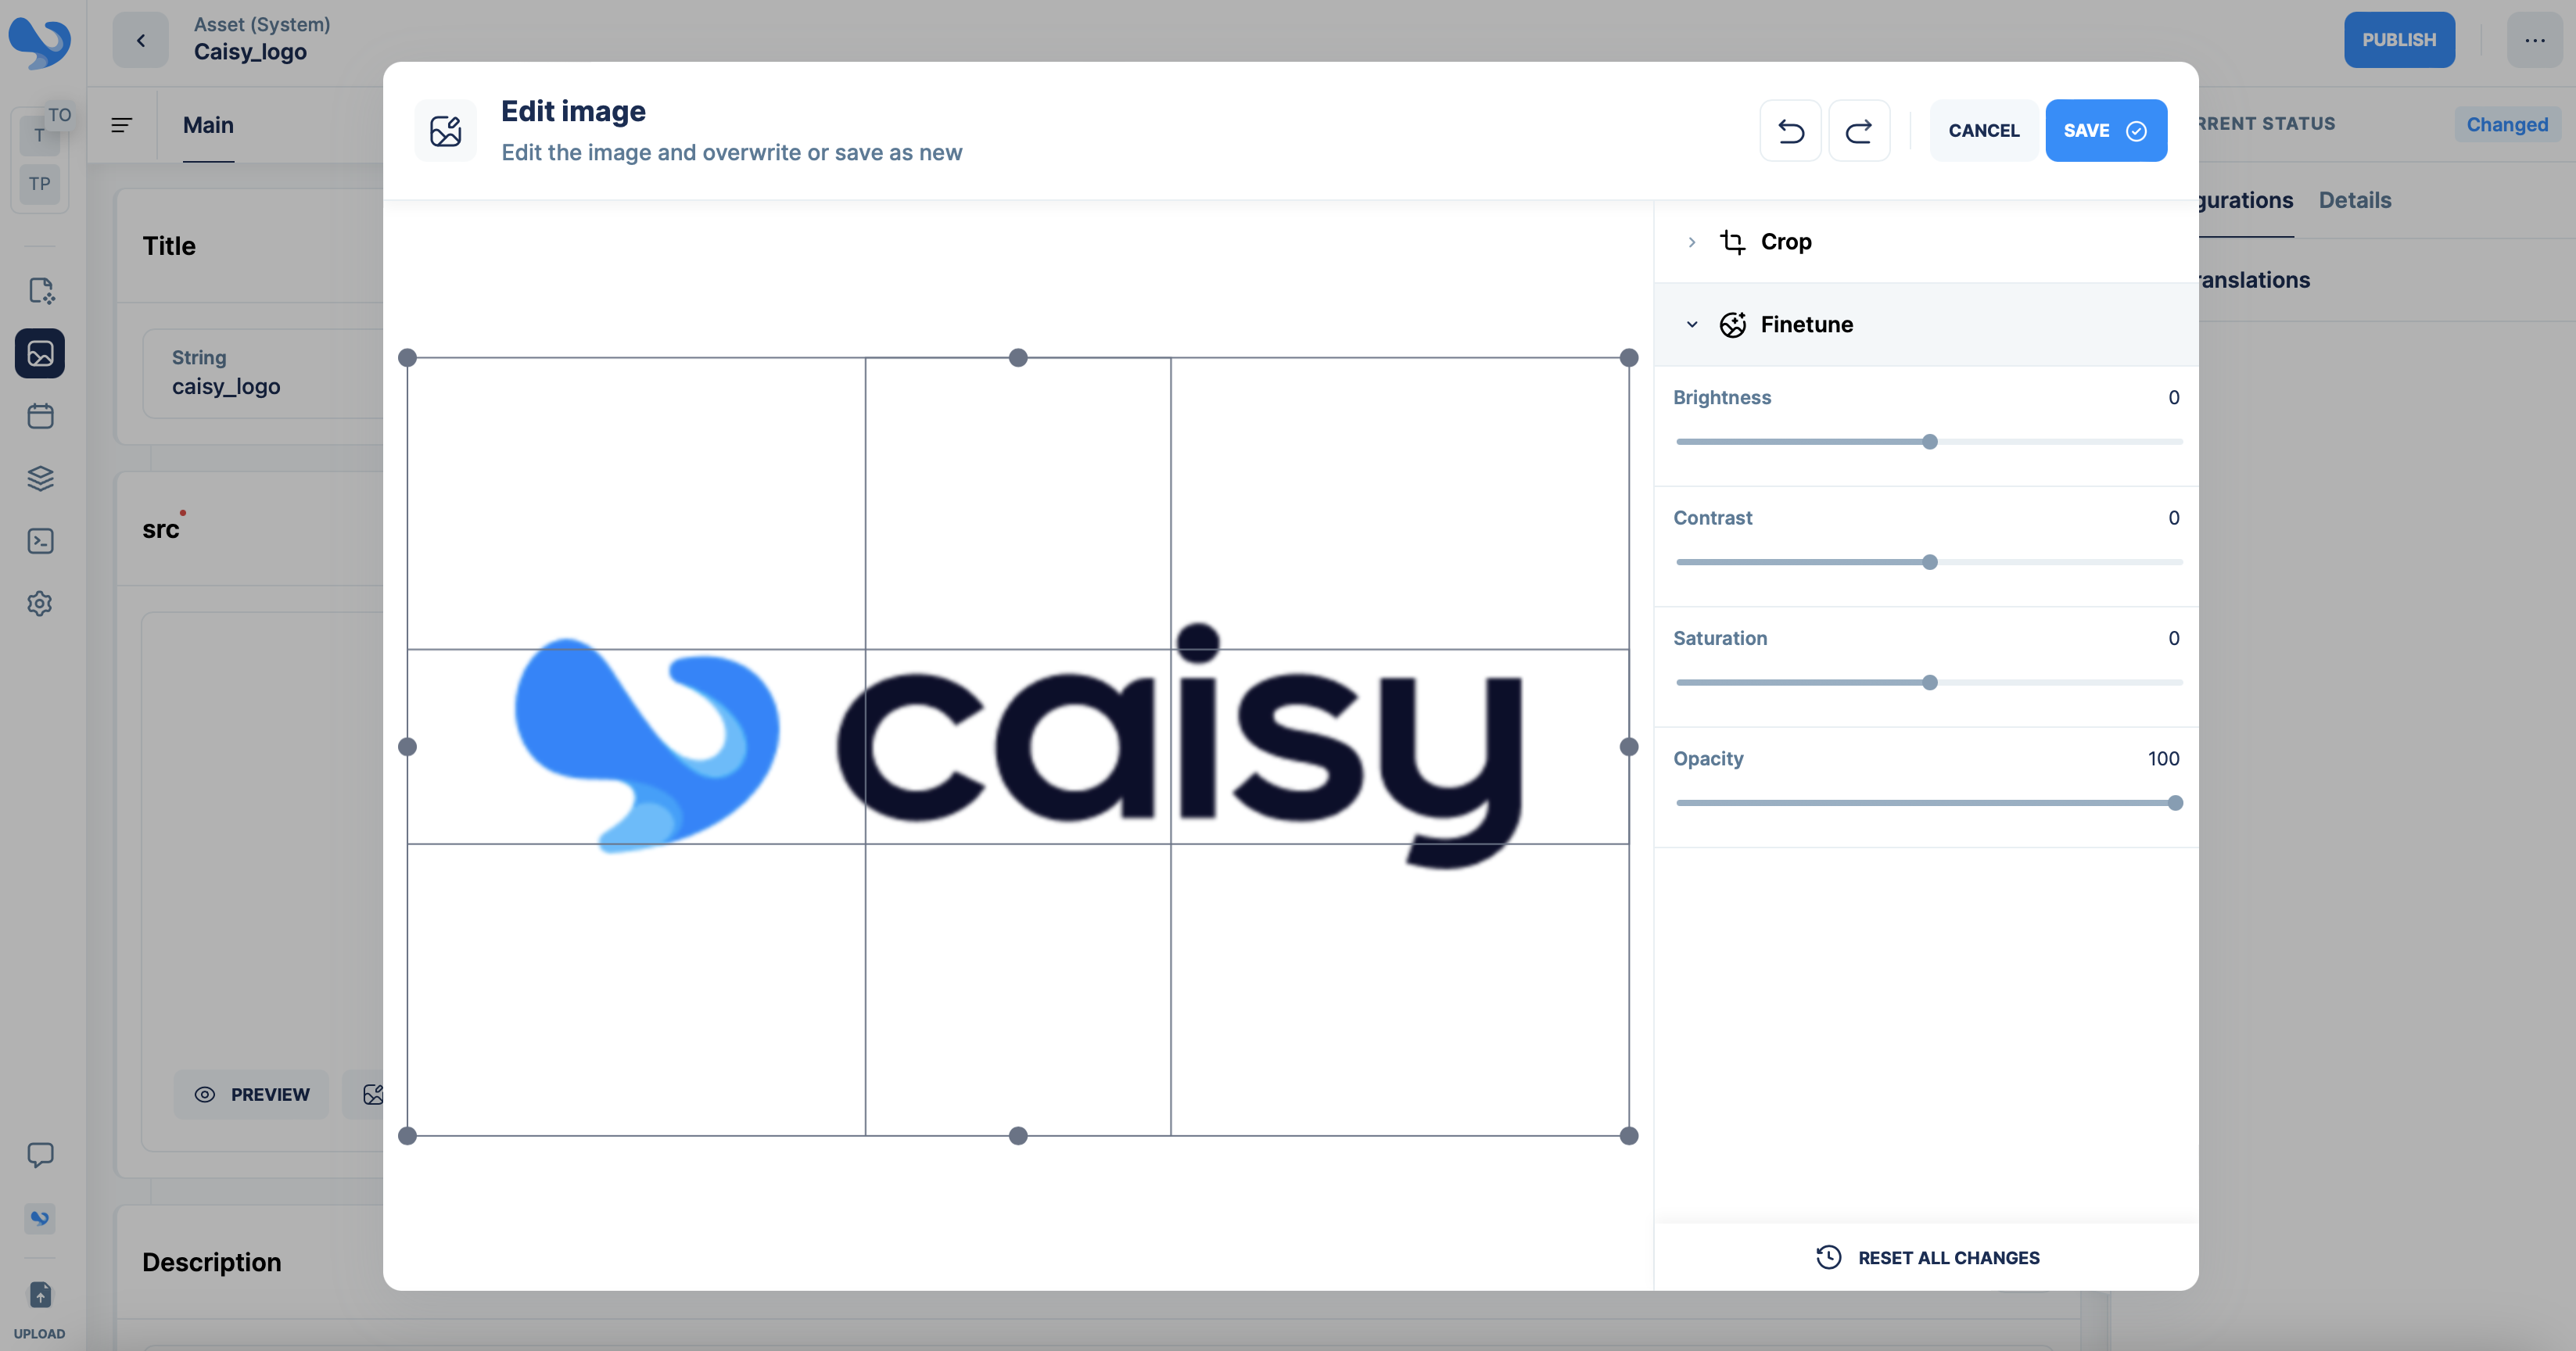 Change the brightness, crop and more: Edit your images directly in caisy.